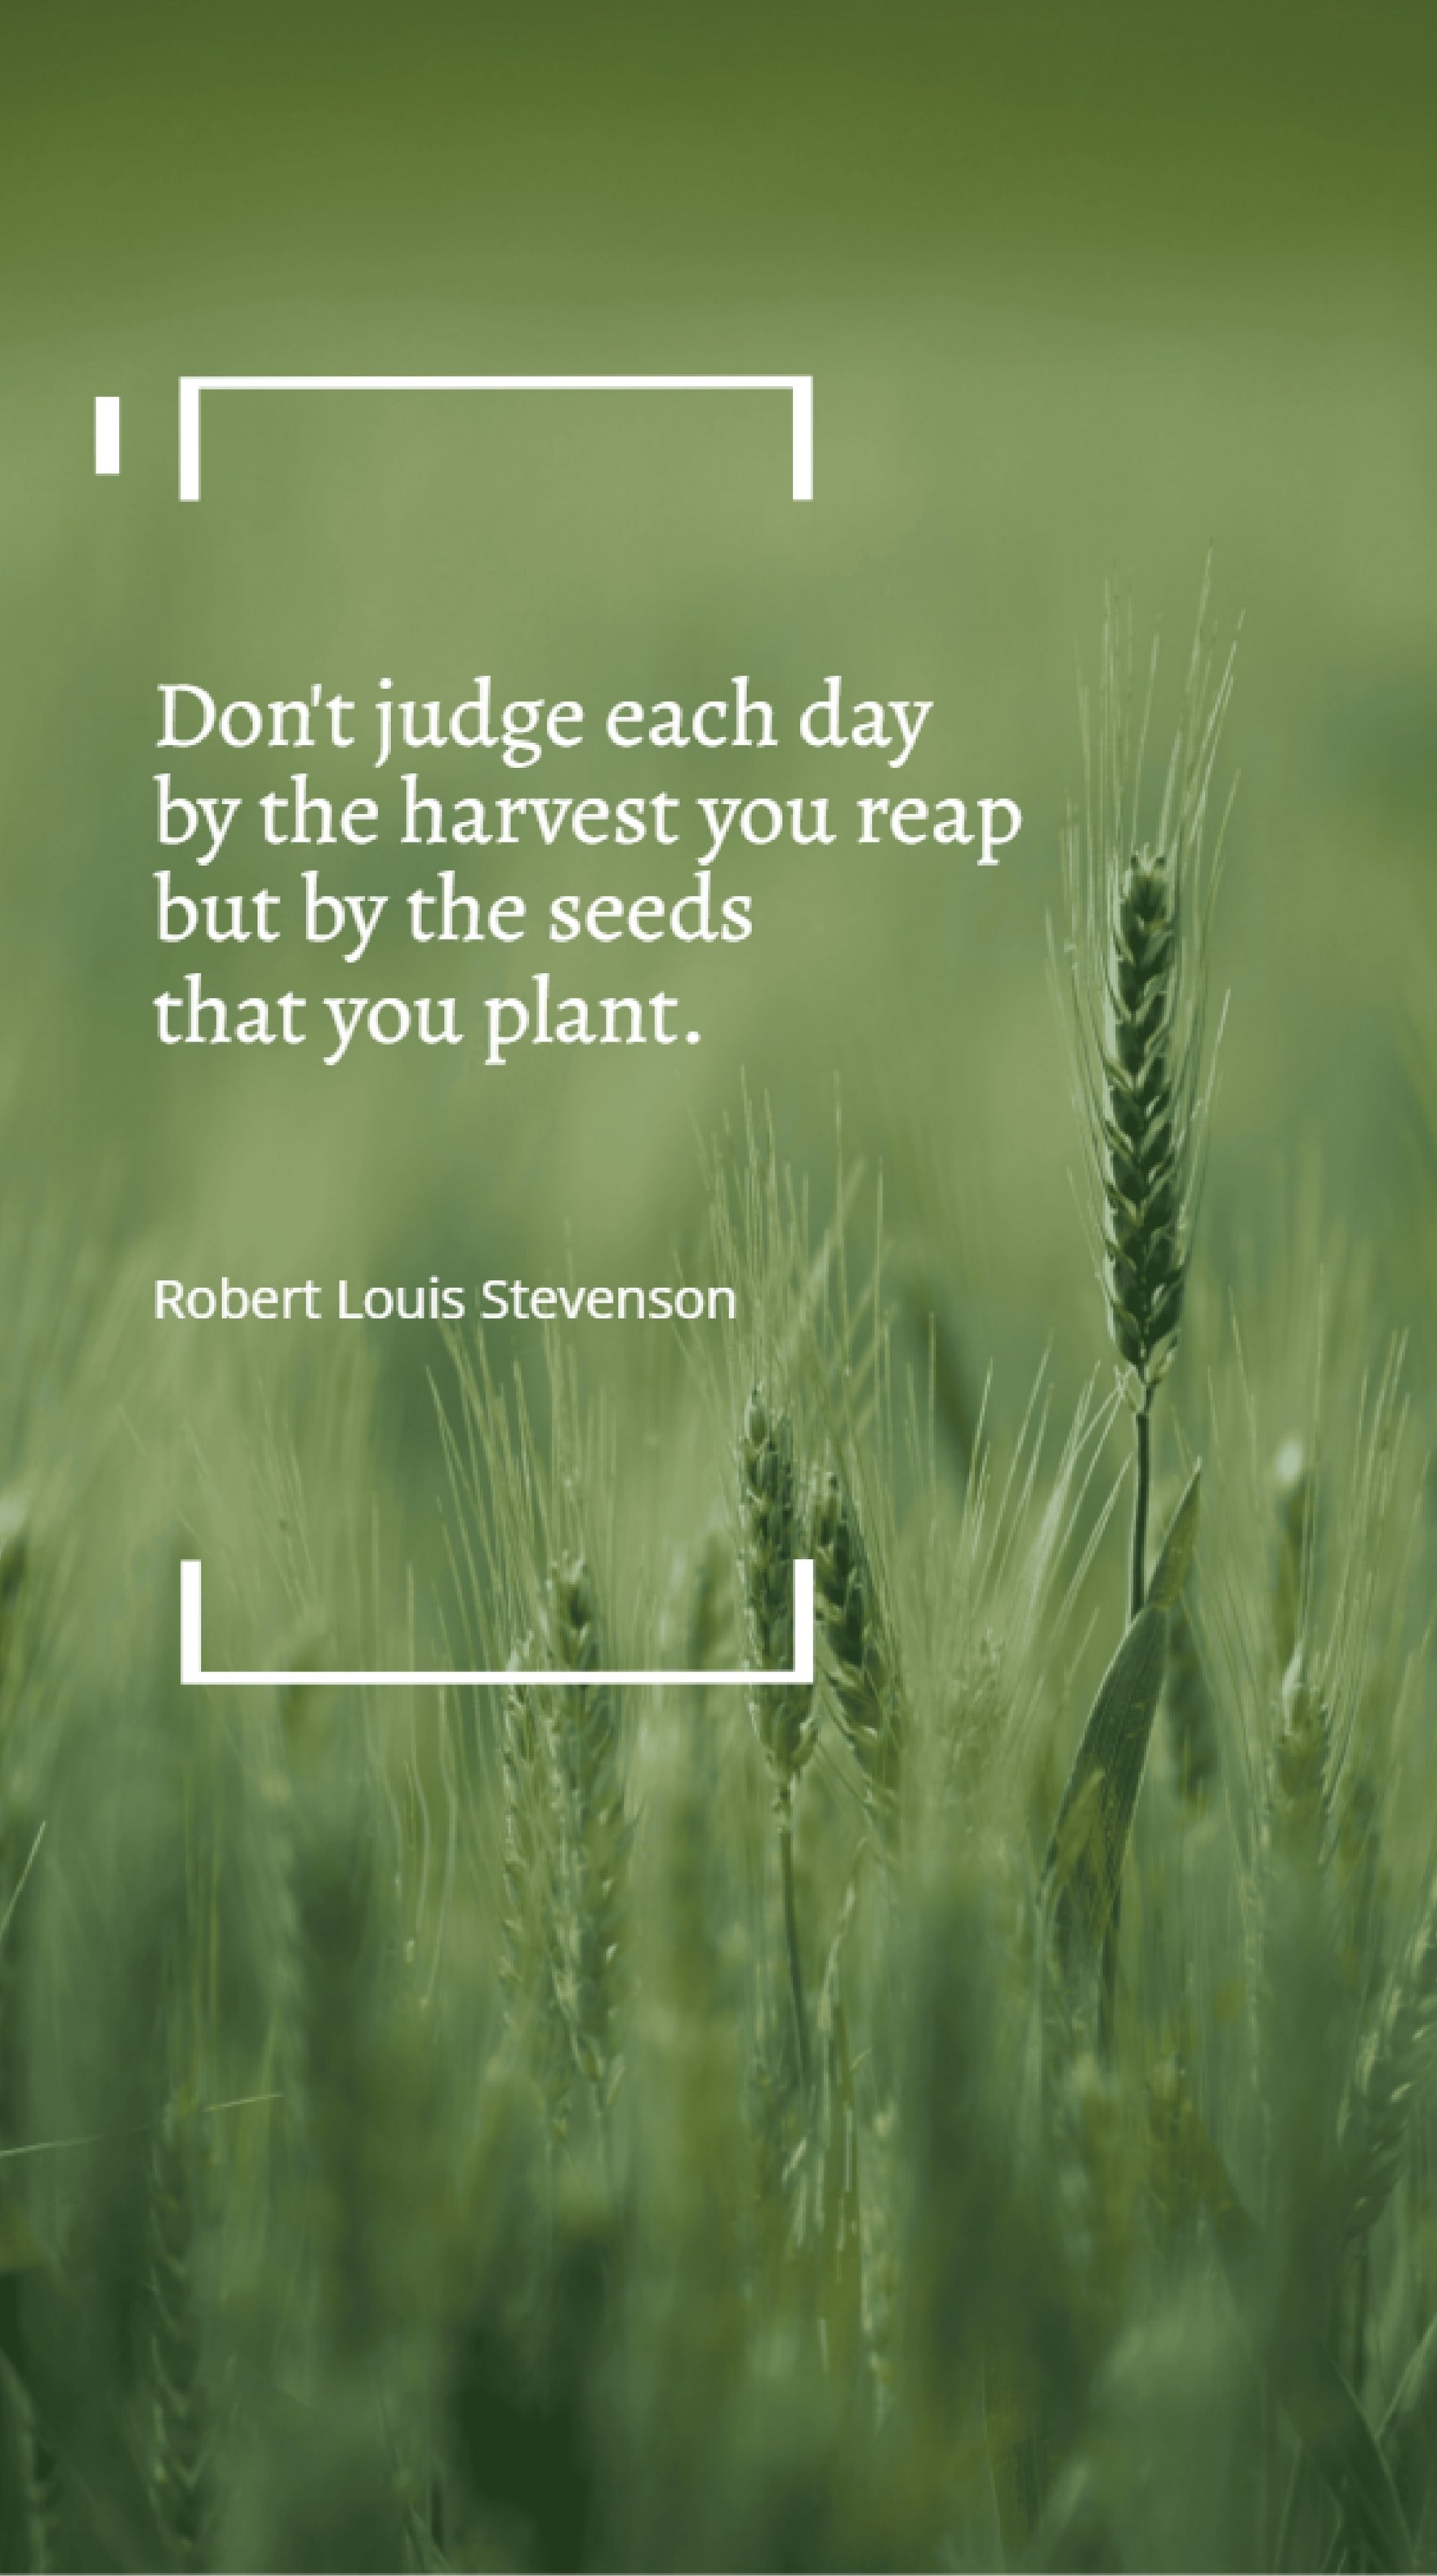 Robert Louis Stevenson - Don't judge each day by the harvest you reap but by the seeds that you plant